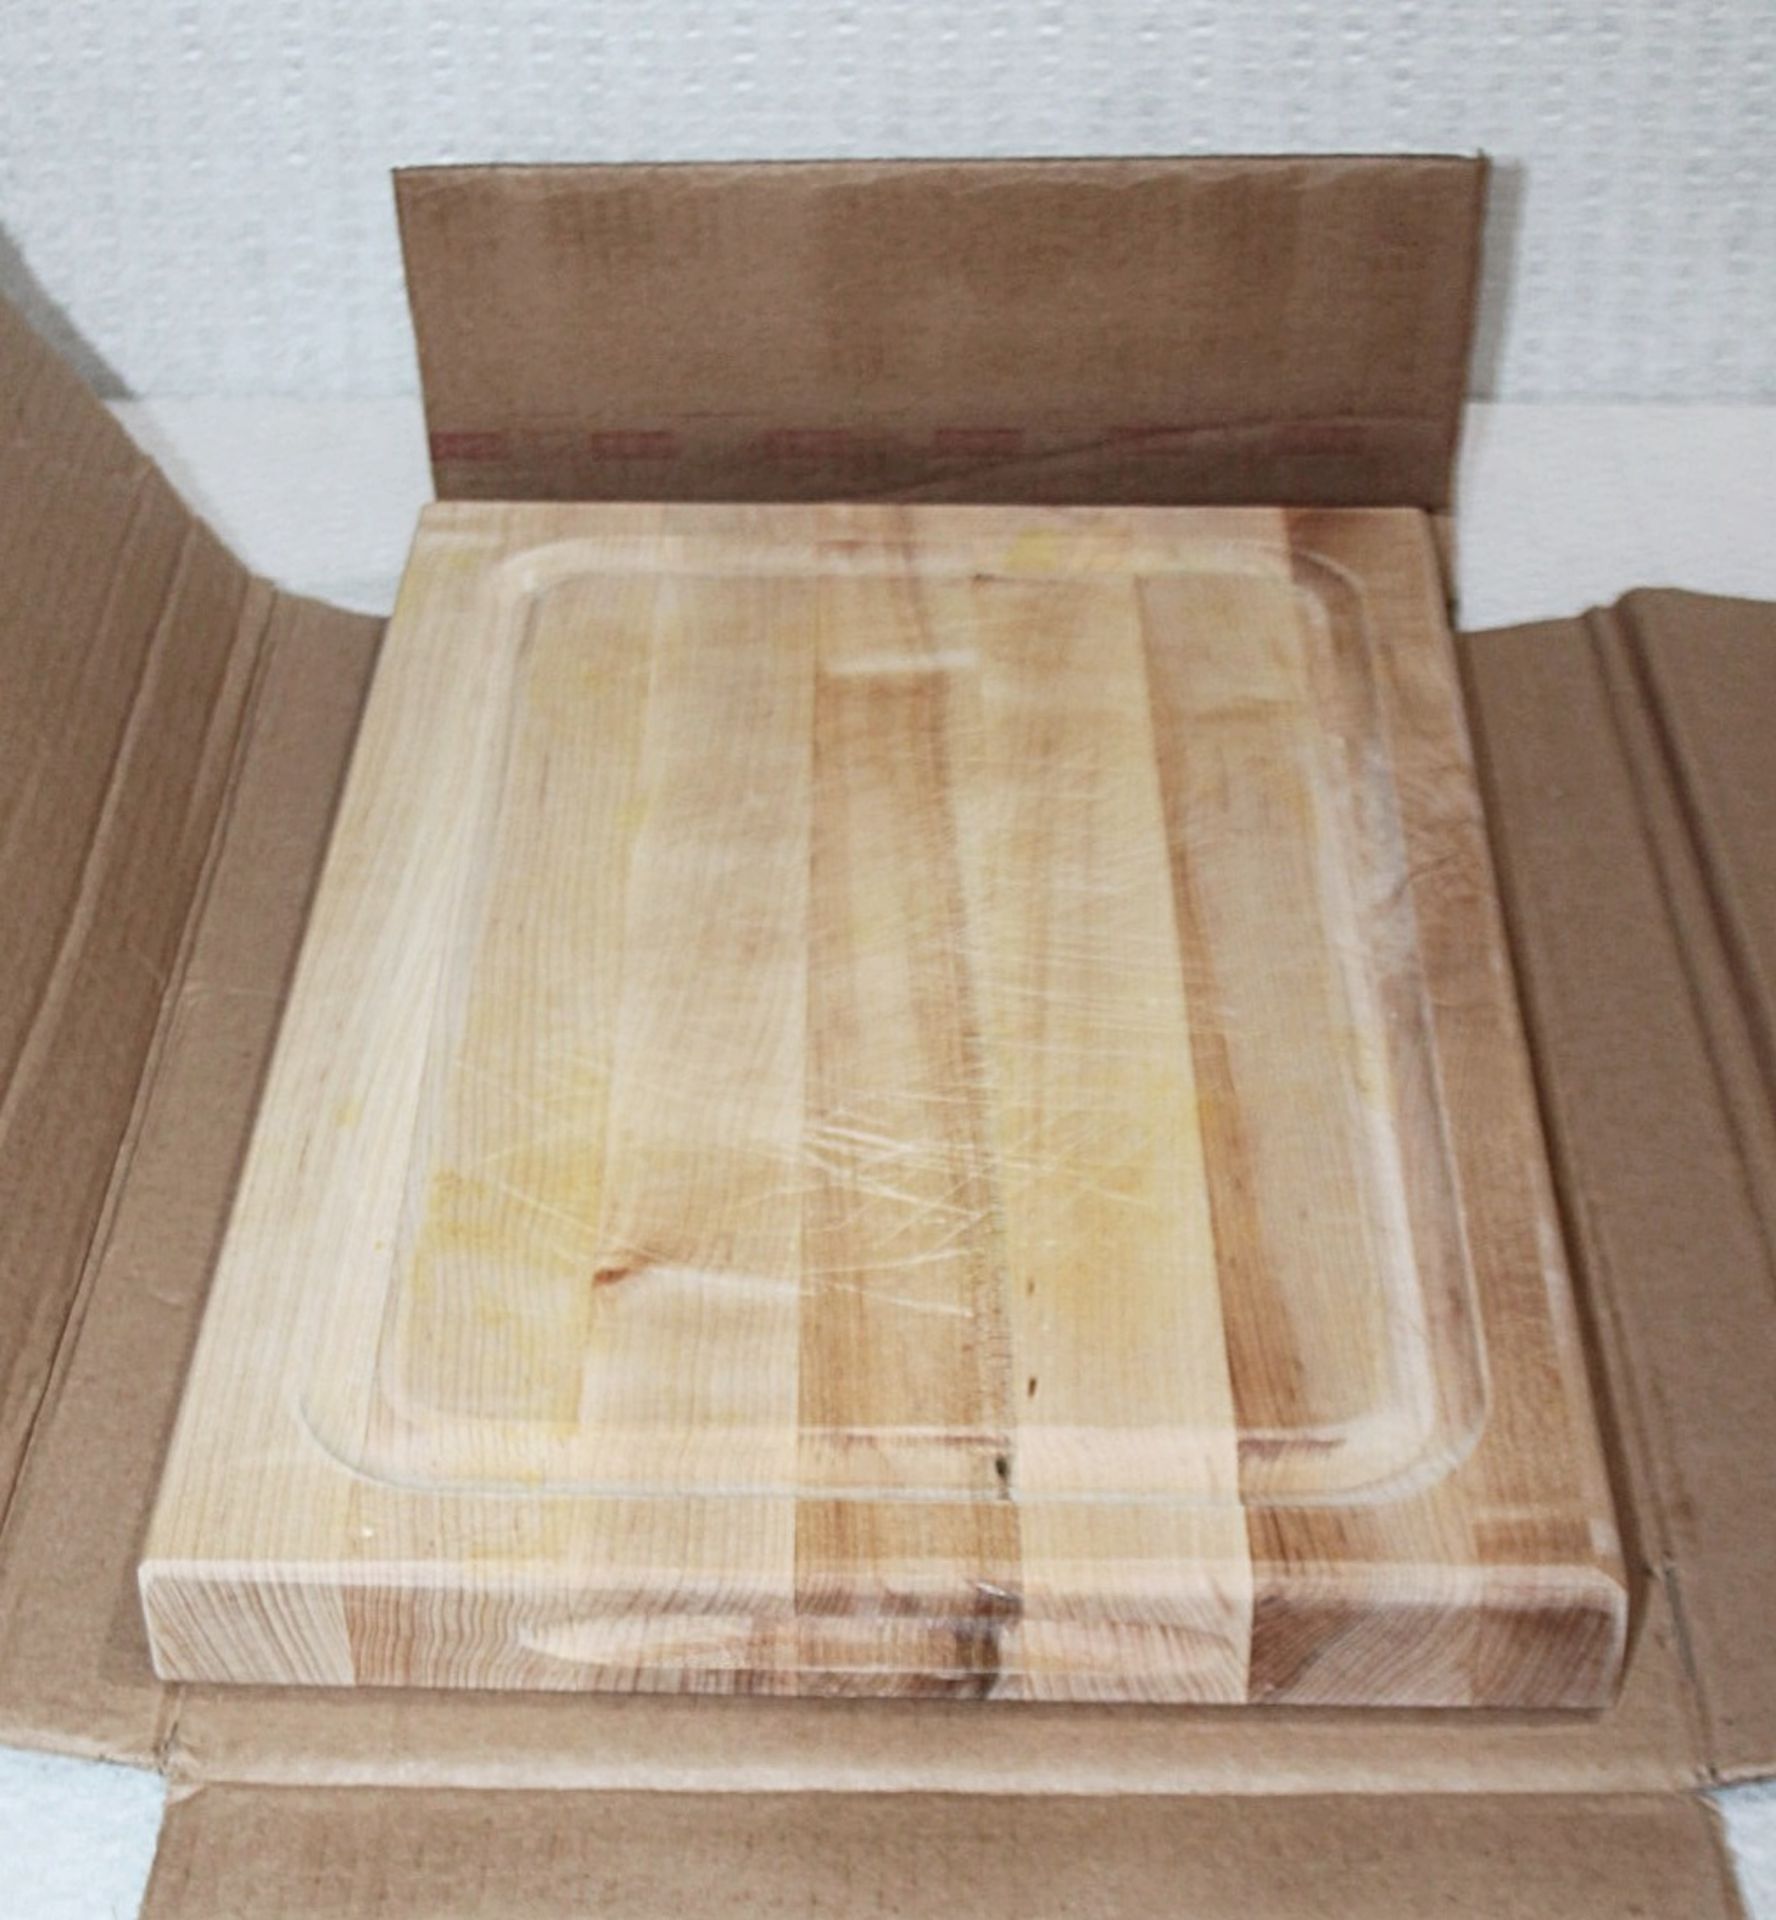 1 x JOHN BOOS 'Block' Reversible Maple Wood Chopping Board with Juice Groove - Image 4 of 6